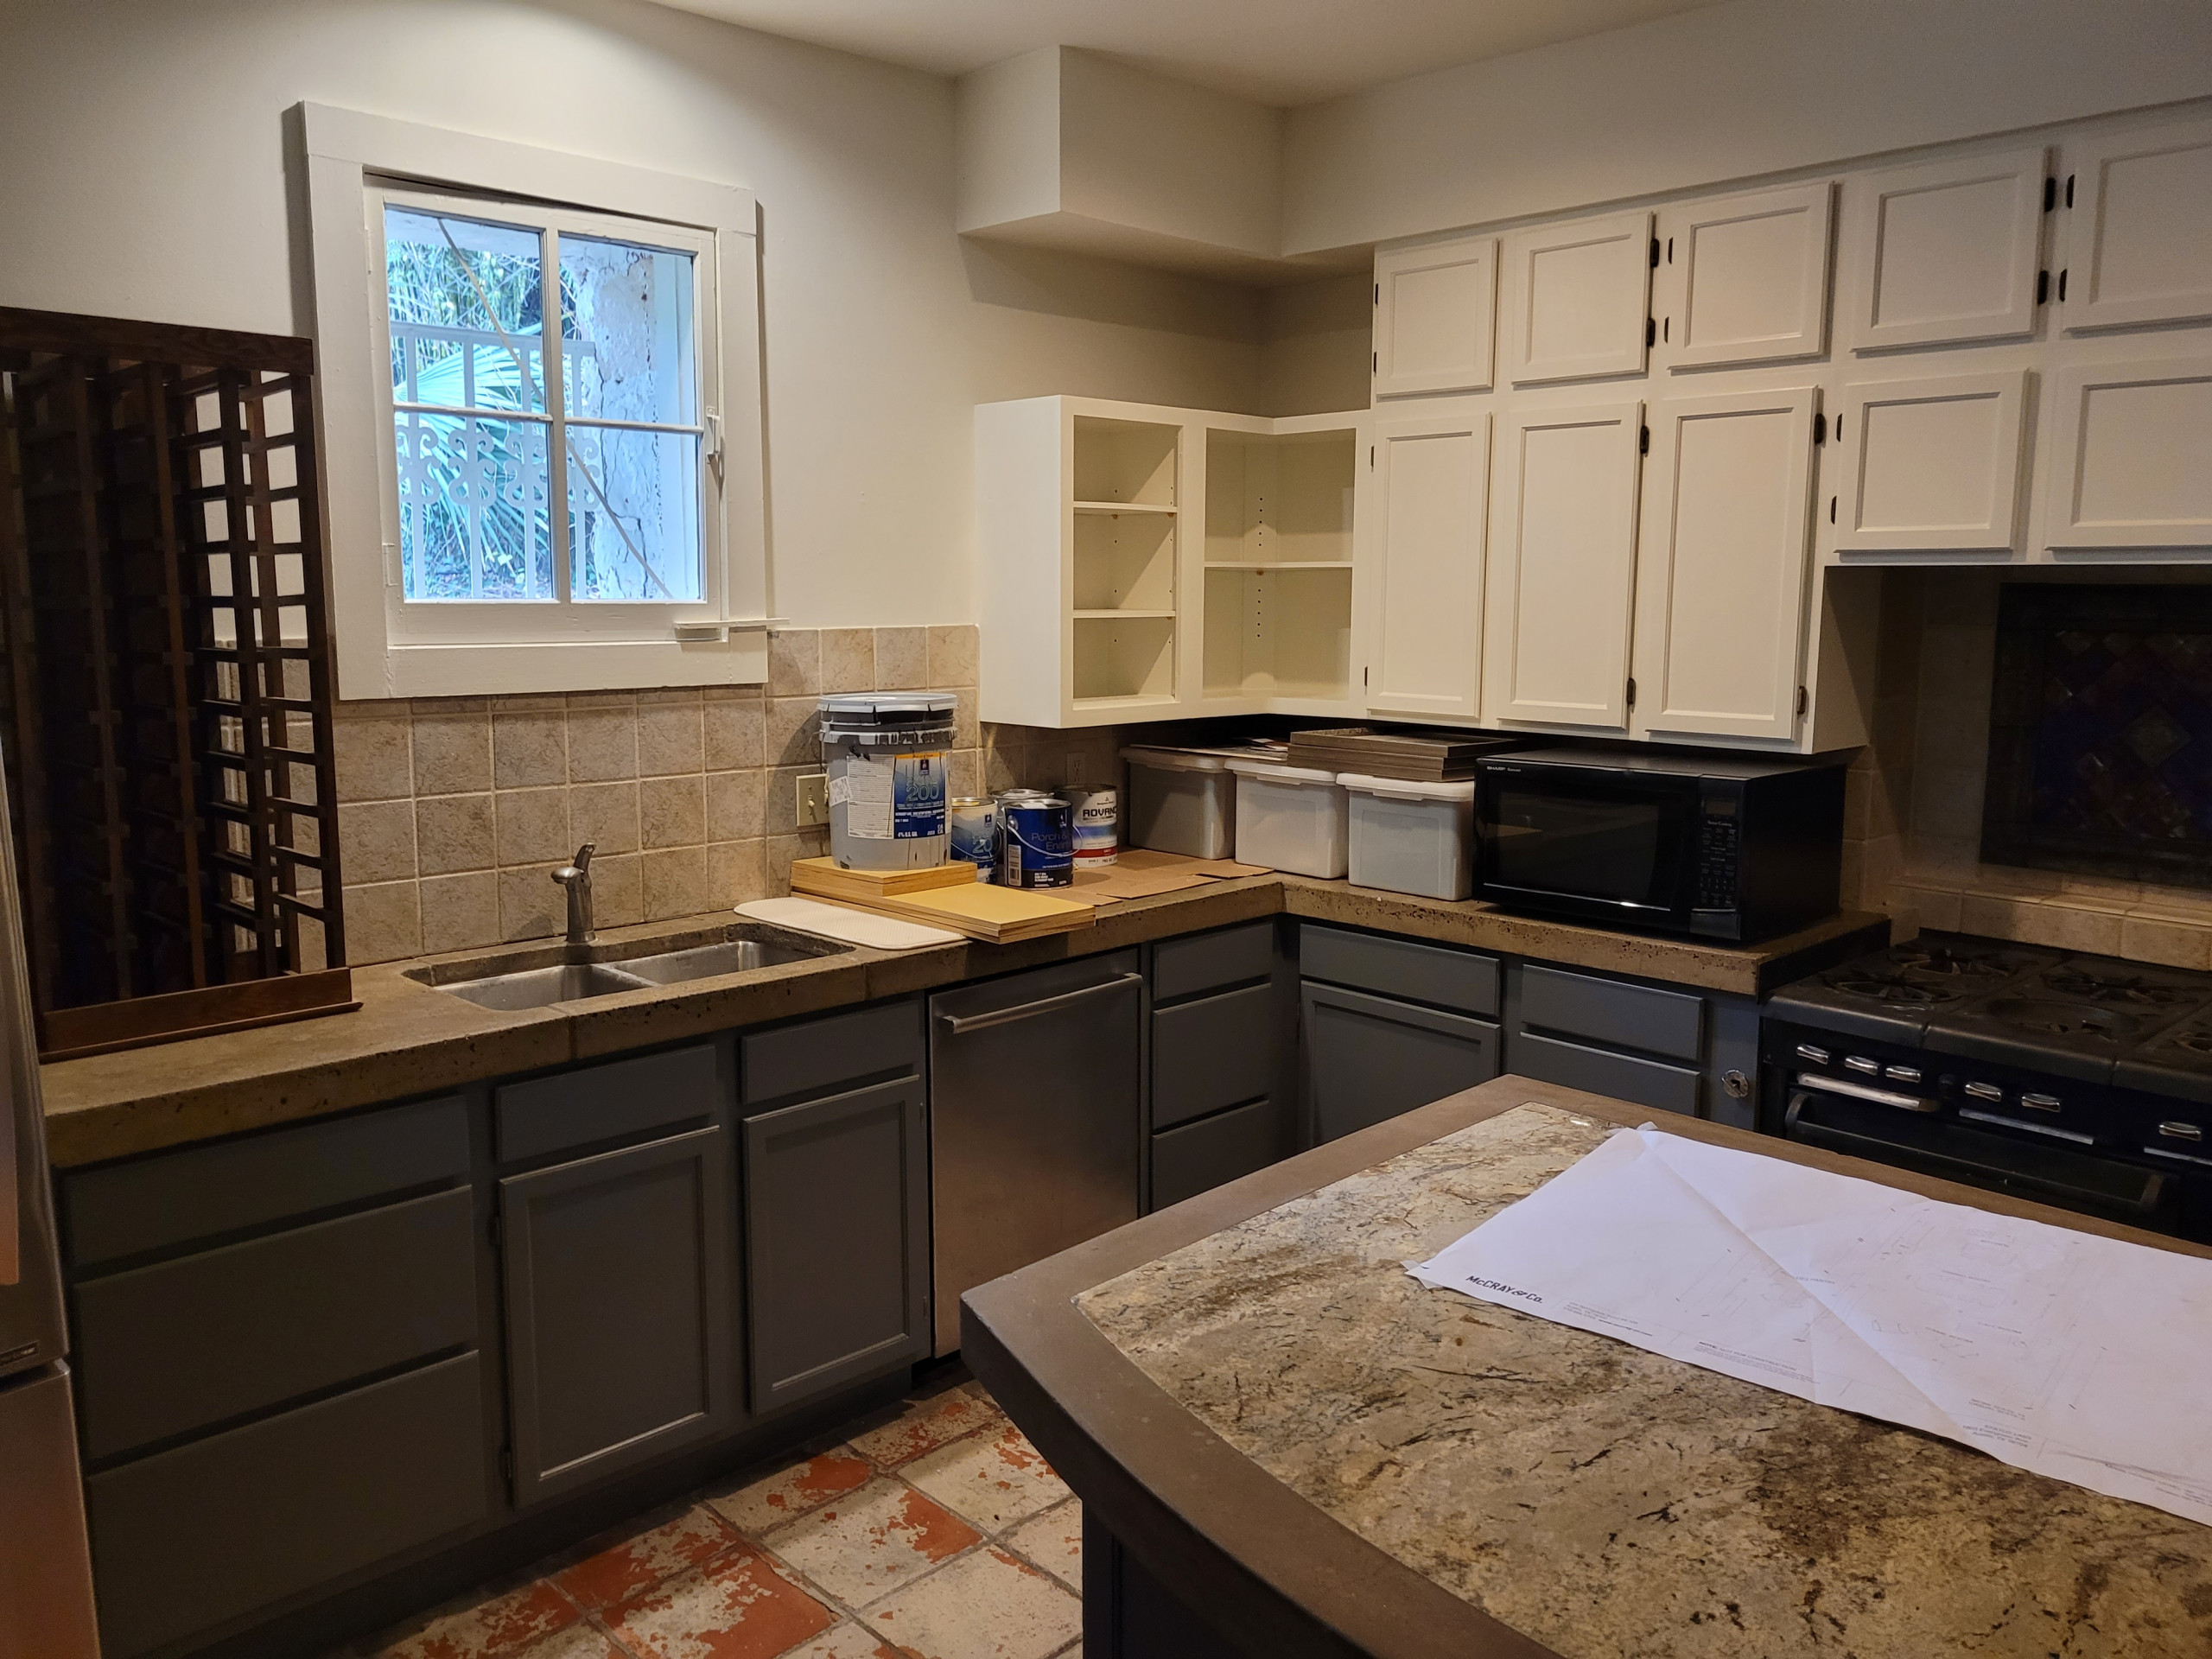 New Paint on Kitchen Cabinetry & Walls